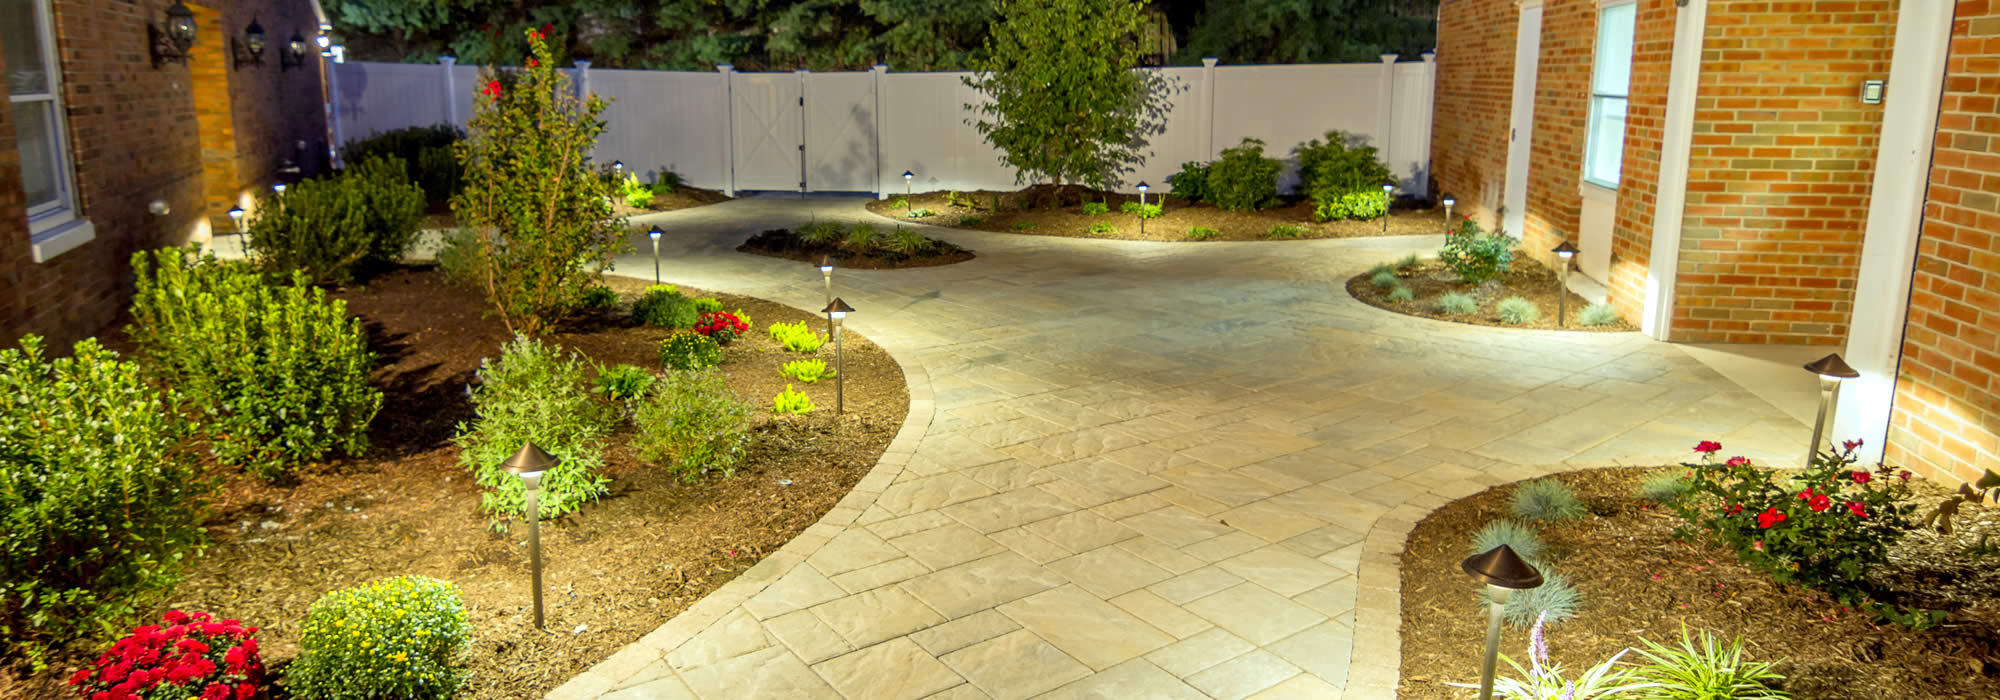 Landscaping Services in Waunakee